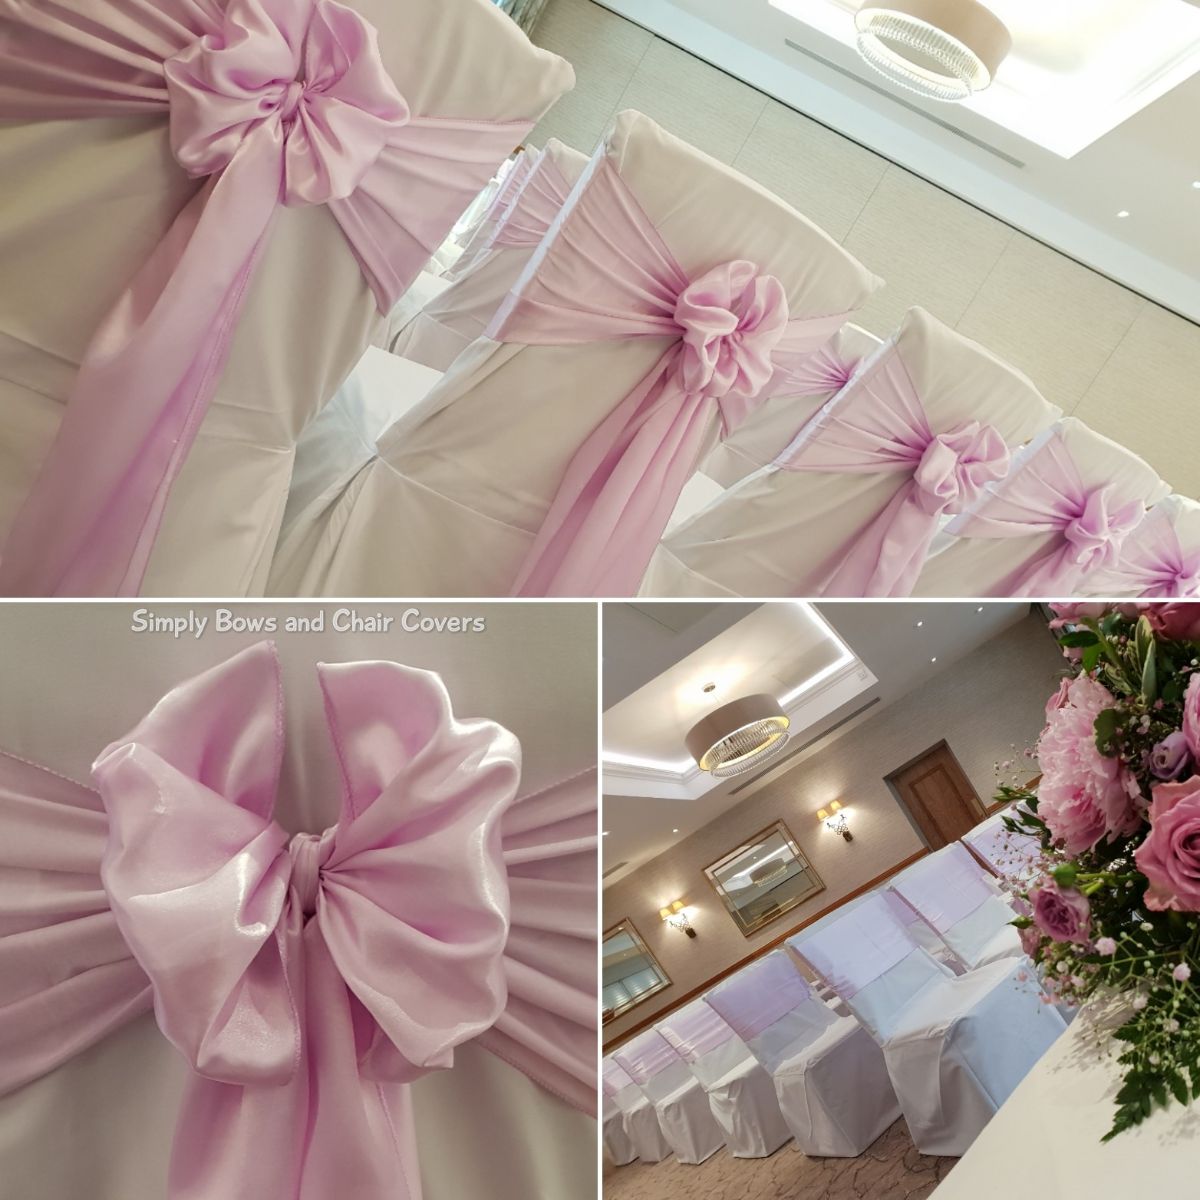 Simply Bows and Chair Covers Cumbria-Image-11